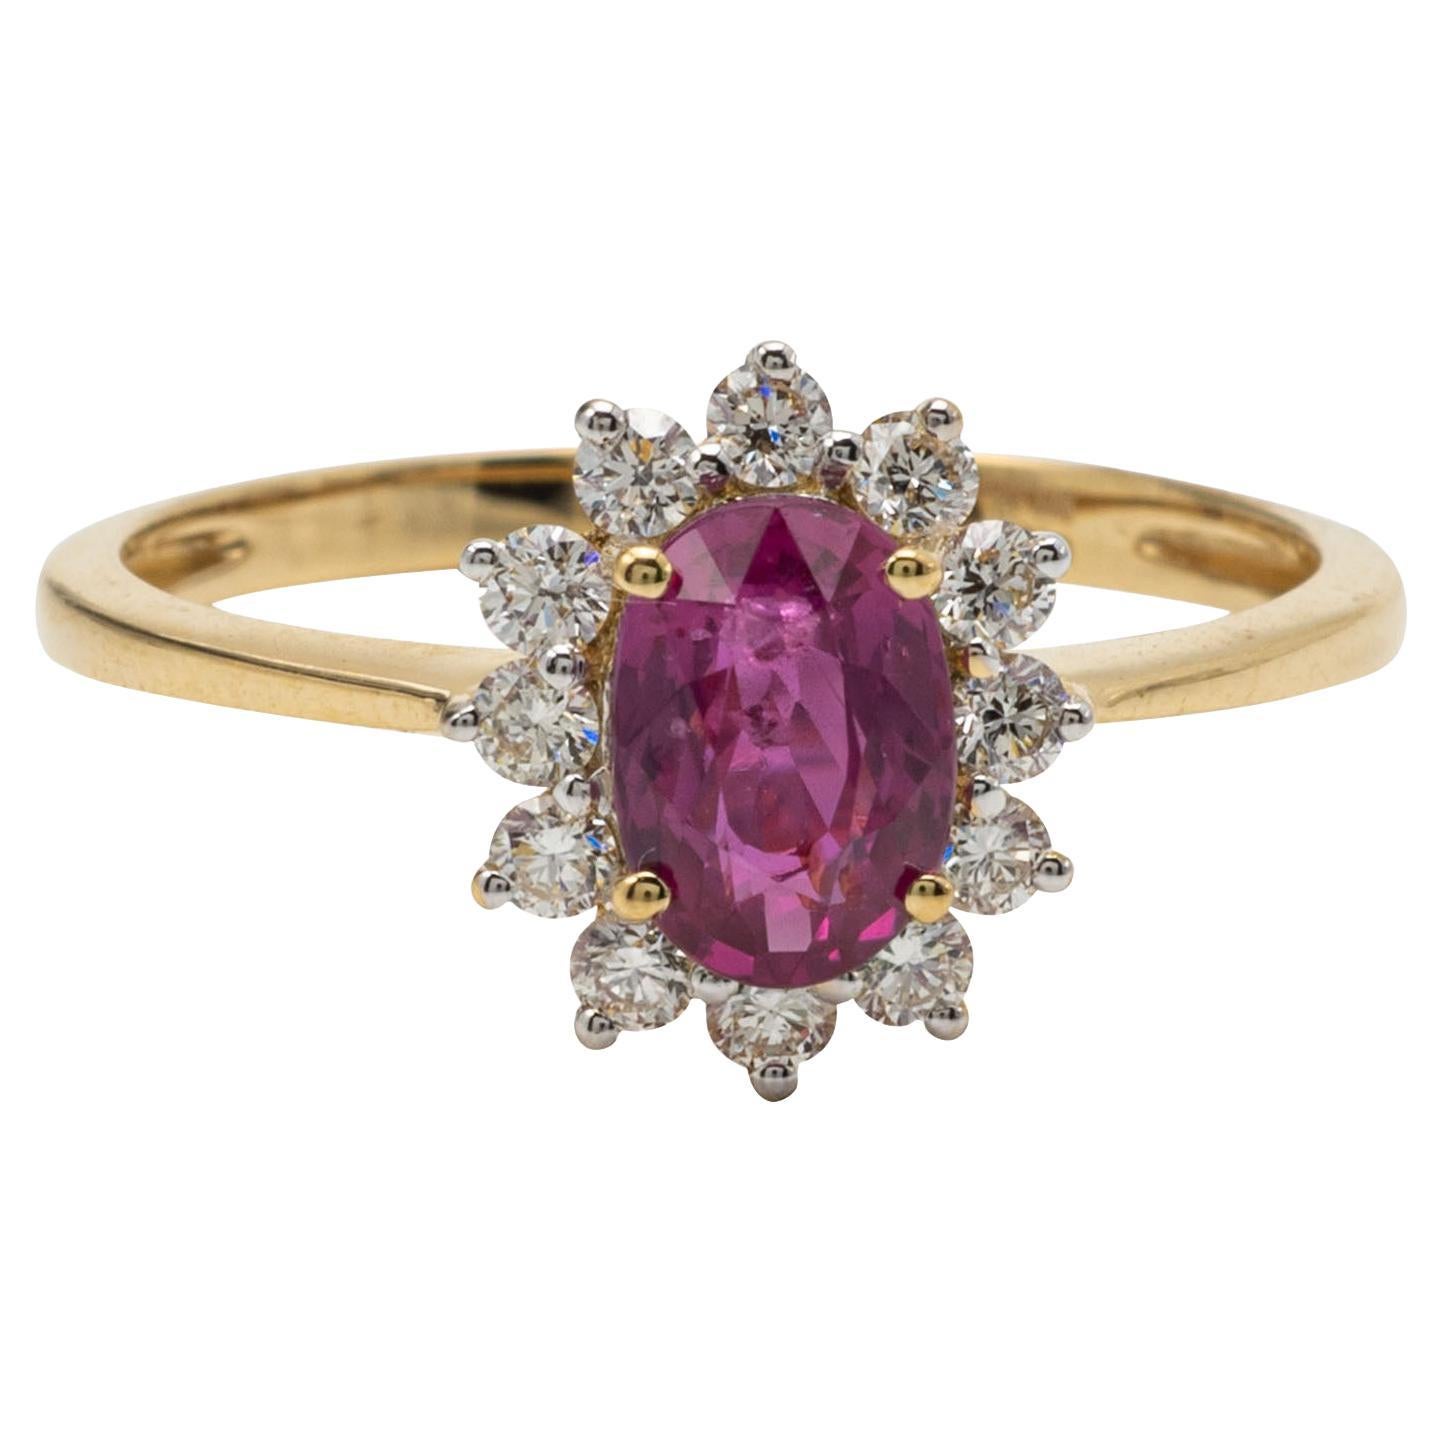 18kt Ruby and Diamond Ring